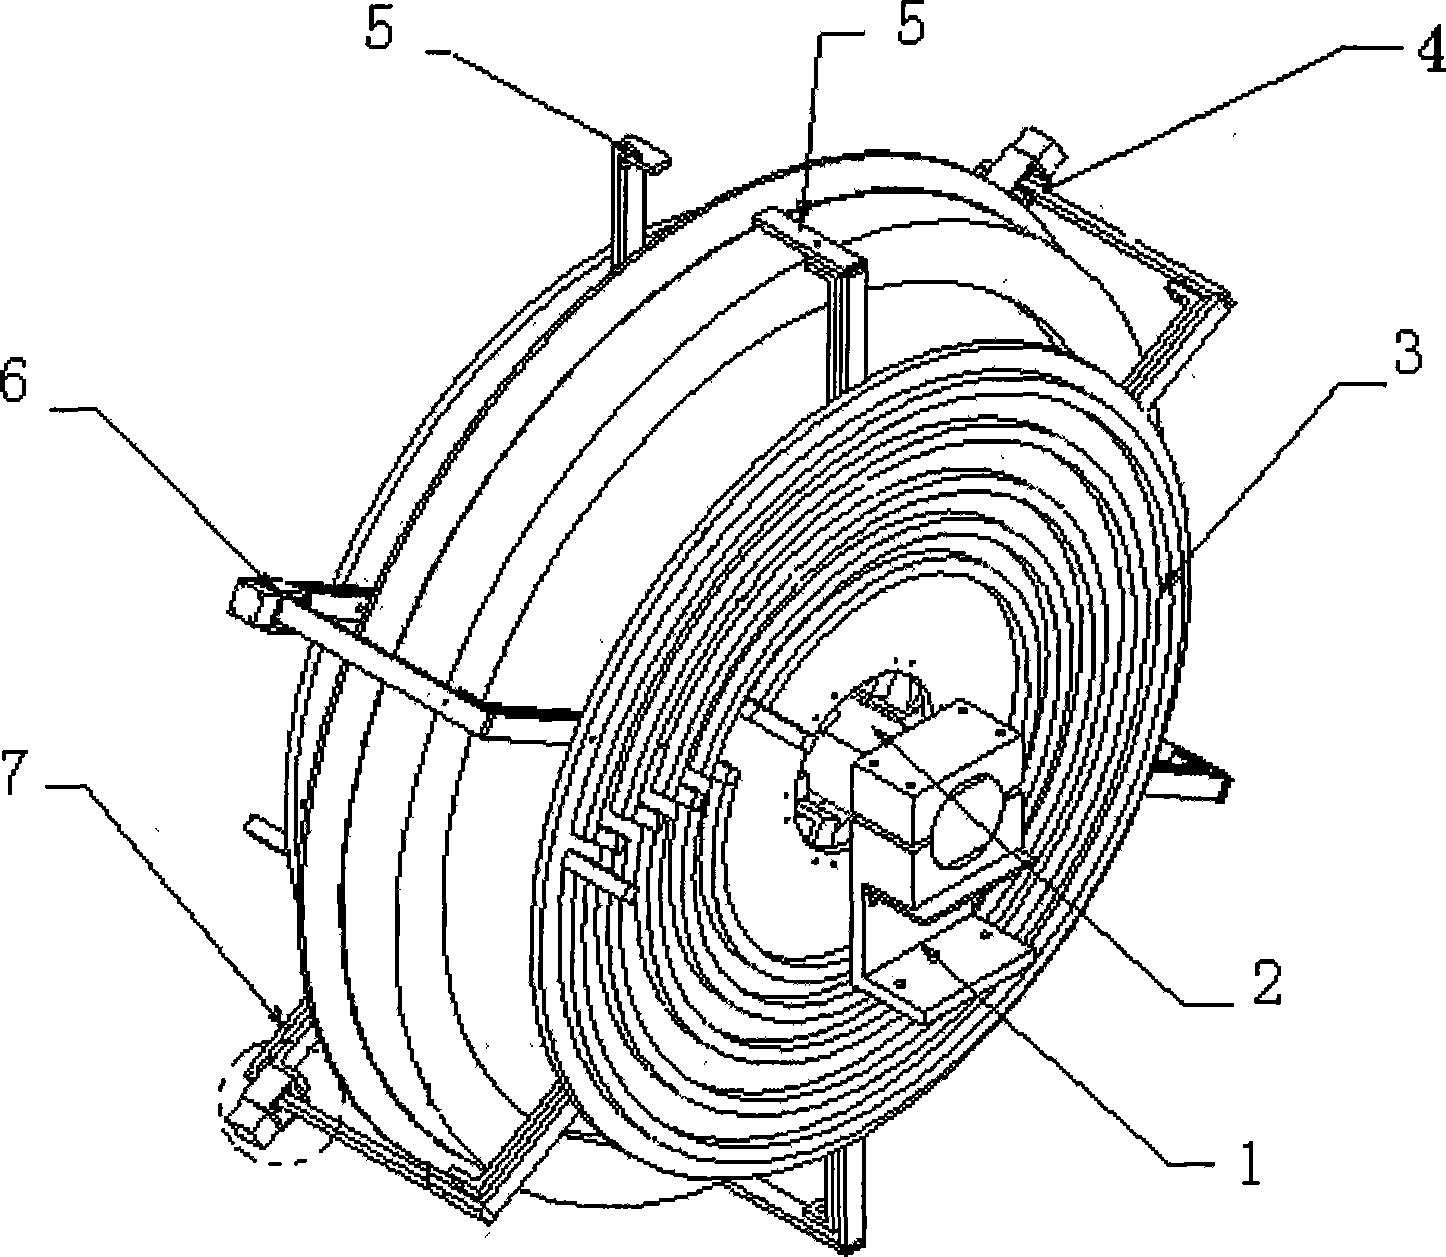 Magnetic powder inspection apparatus